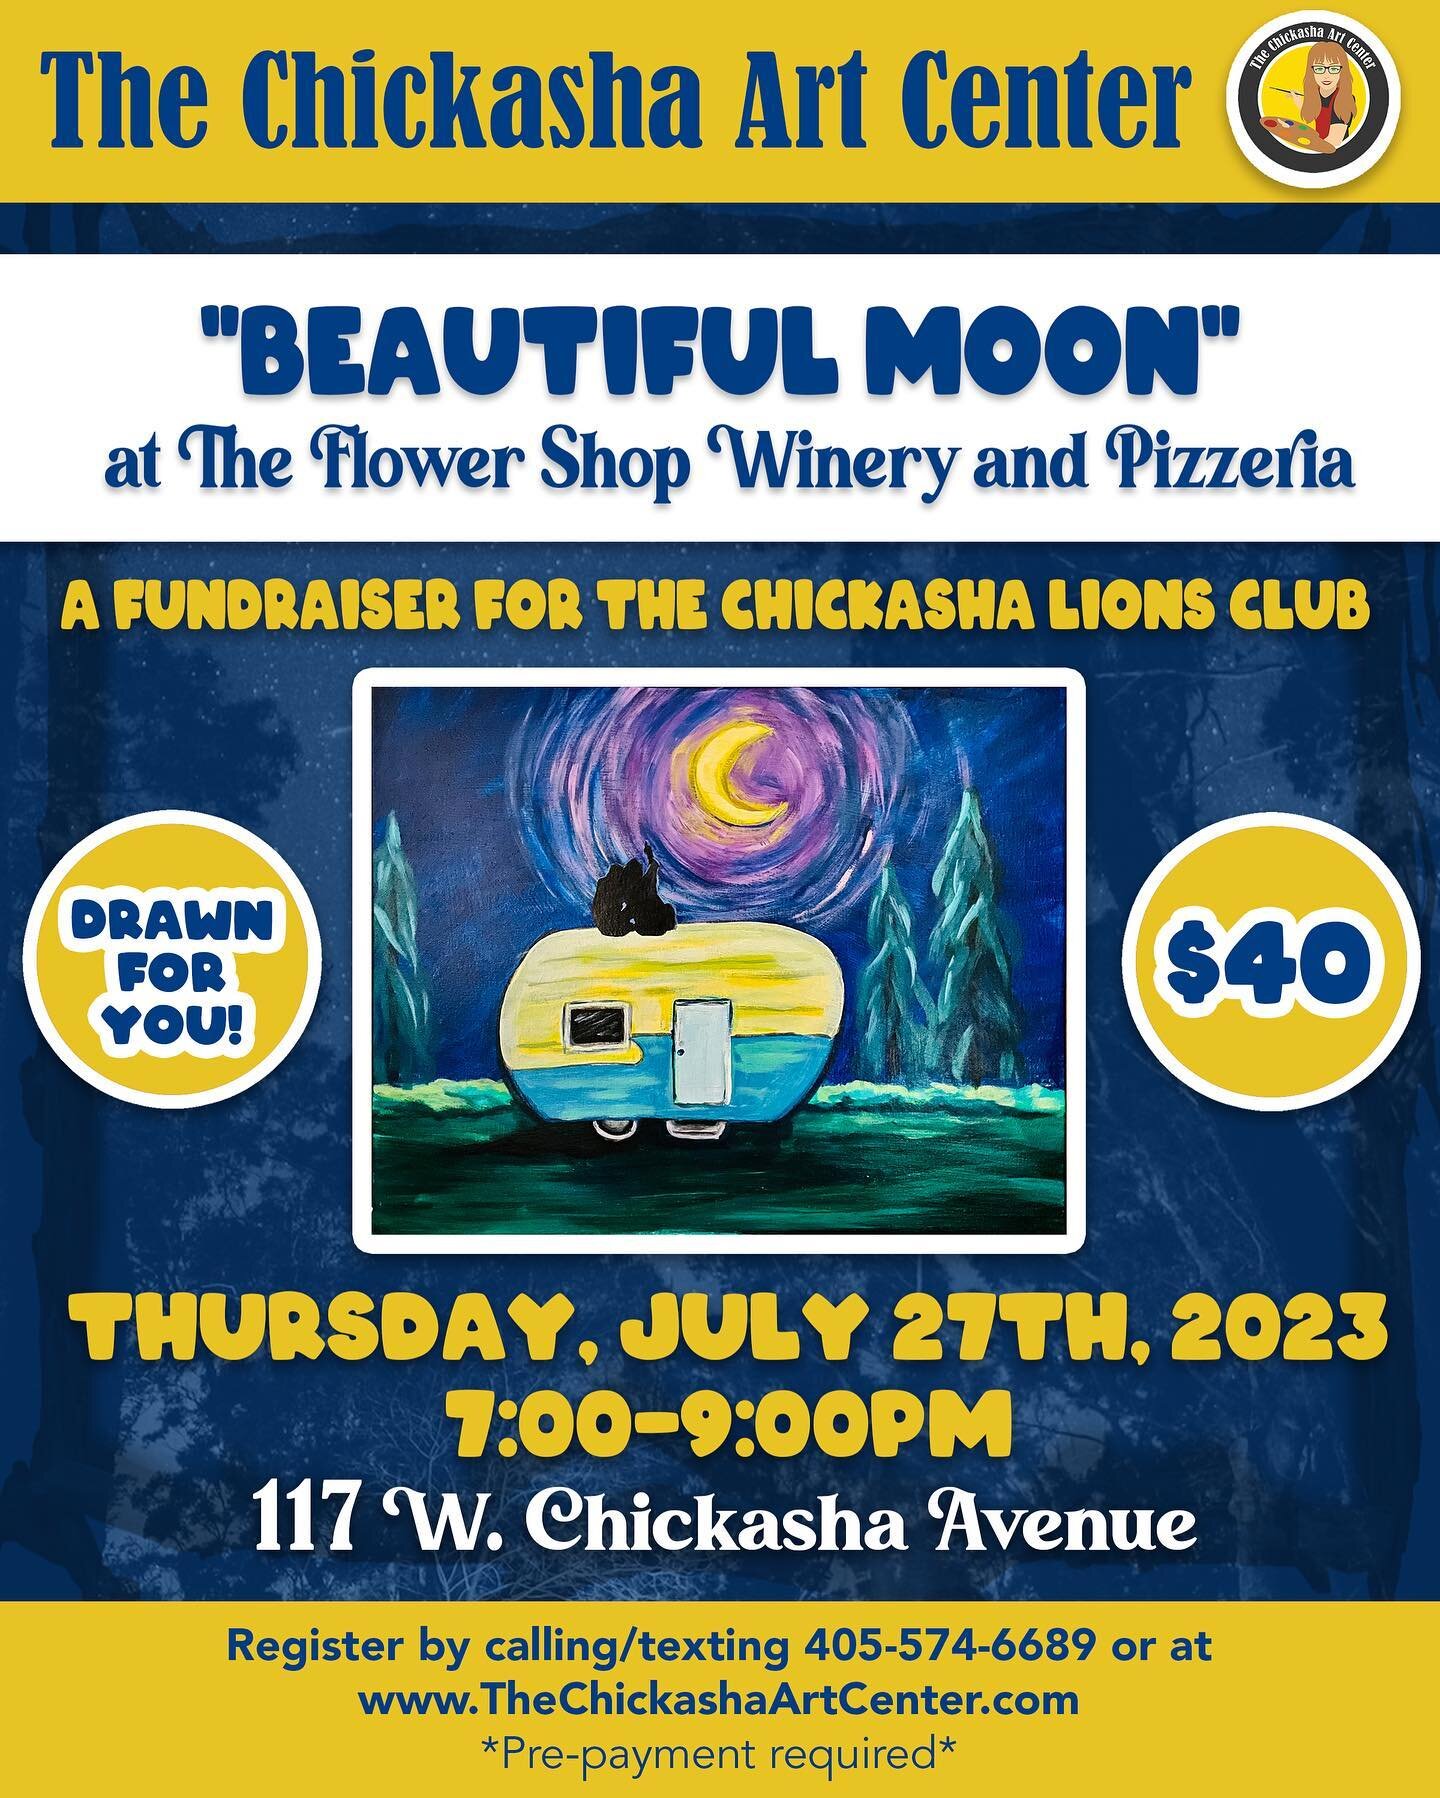 Check out this fun event! Order food and drinks from Brandi&rsquo;s or Flower Shop Winery and Pizzeria during the event! Let&rsquo;s support the Chickasha Lions Club!
-
#shoplocal #fundraiser #chickashaok #chickasha #chickashaoklahoma